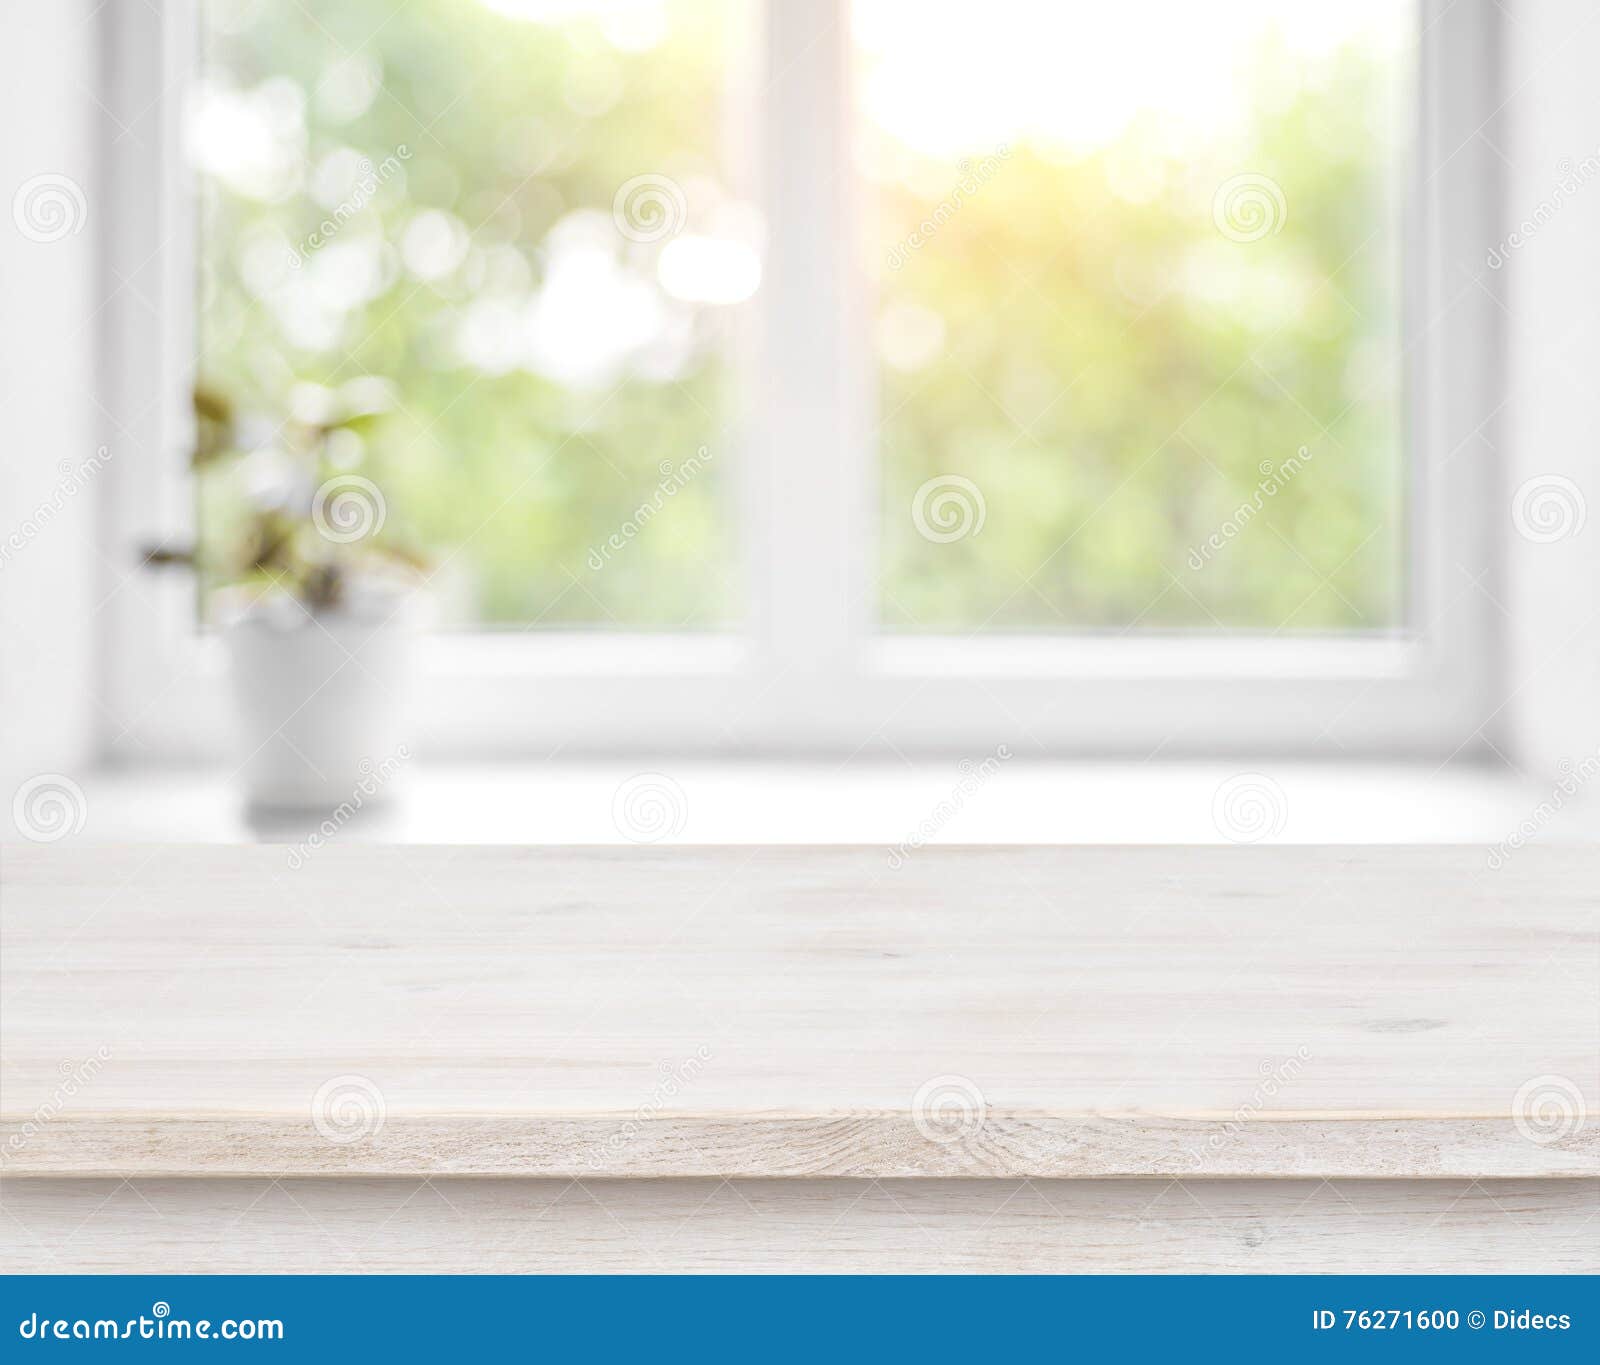 wooden table on defocused summer window with flower pot background